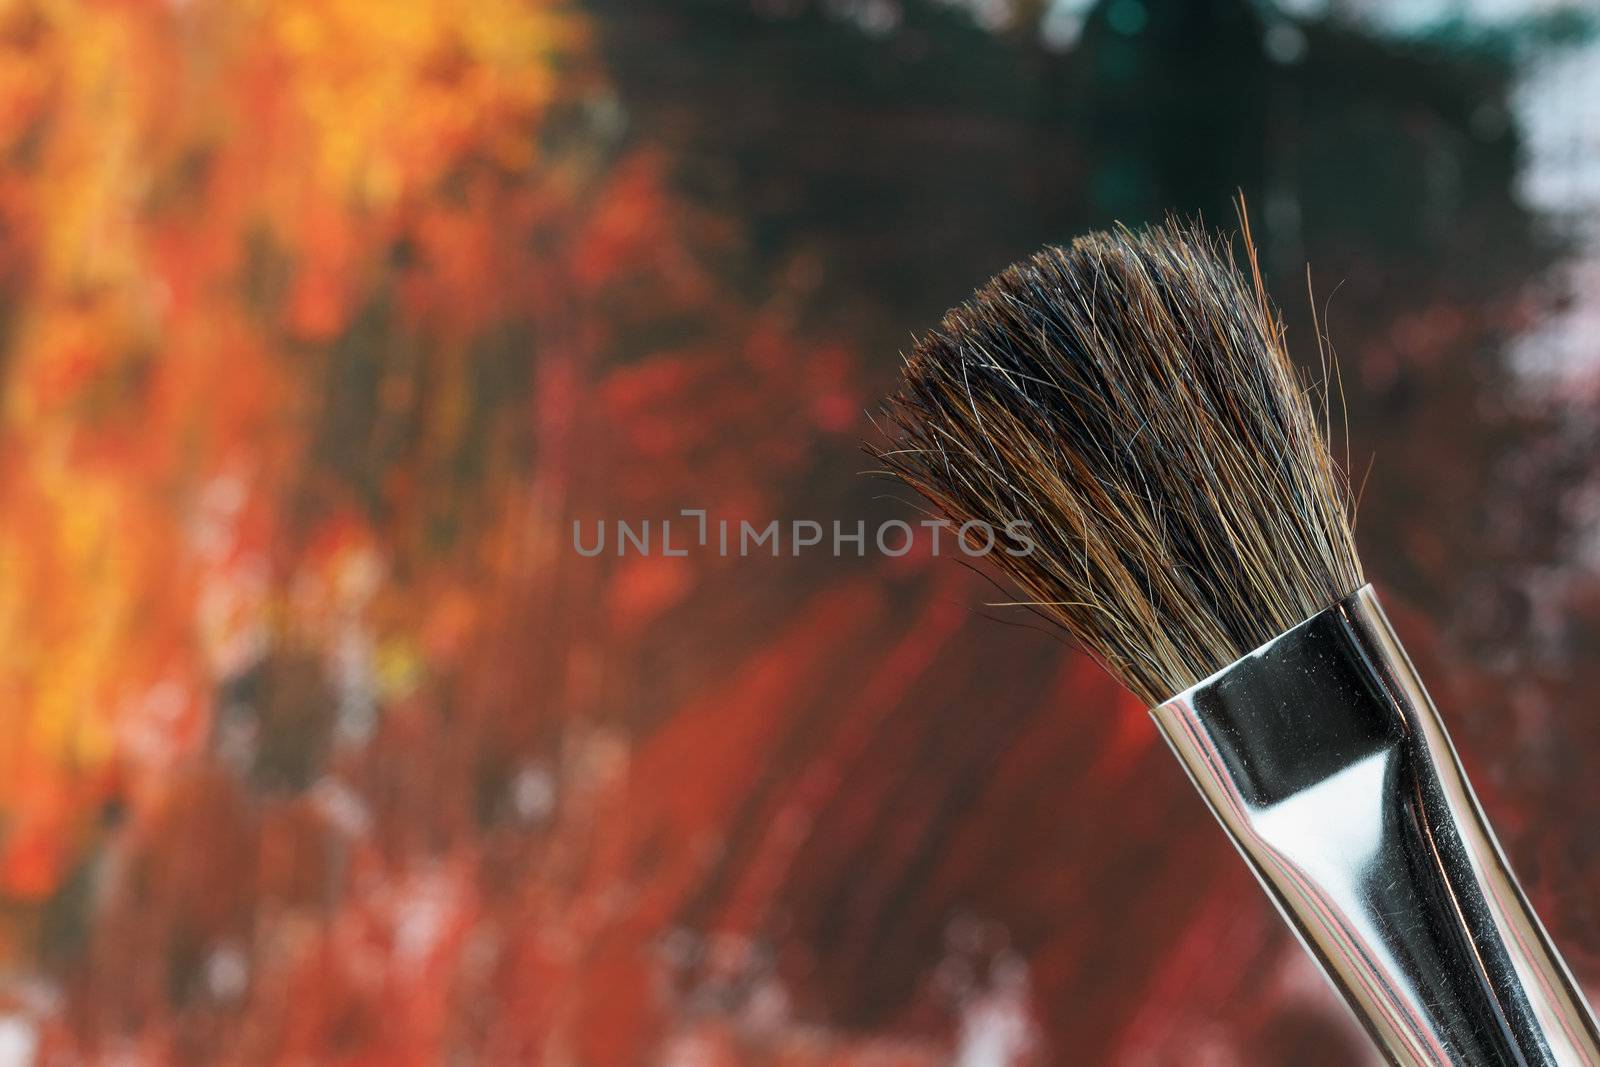 Paintbrush against an abstract grunge painting.